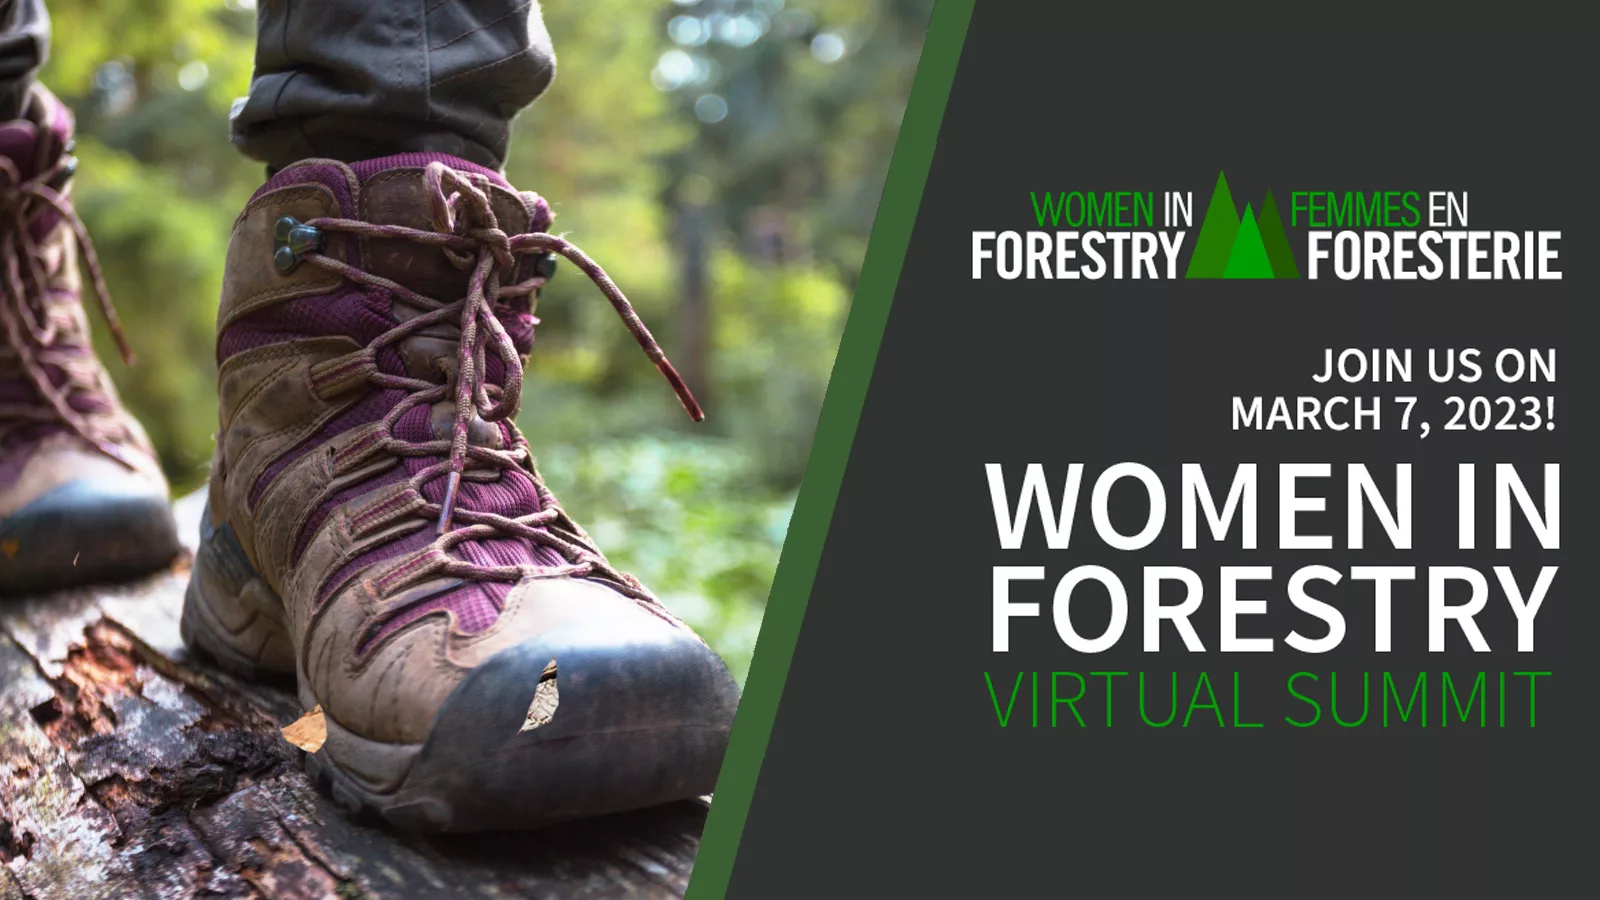 Women in Forestry Virtual Summit Event Promotion